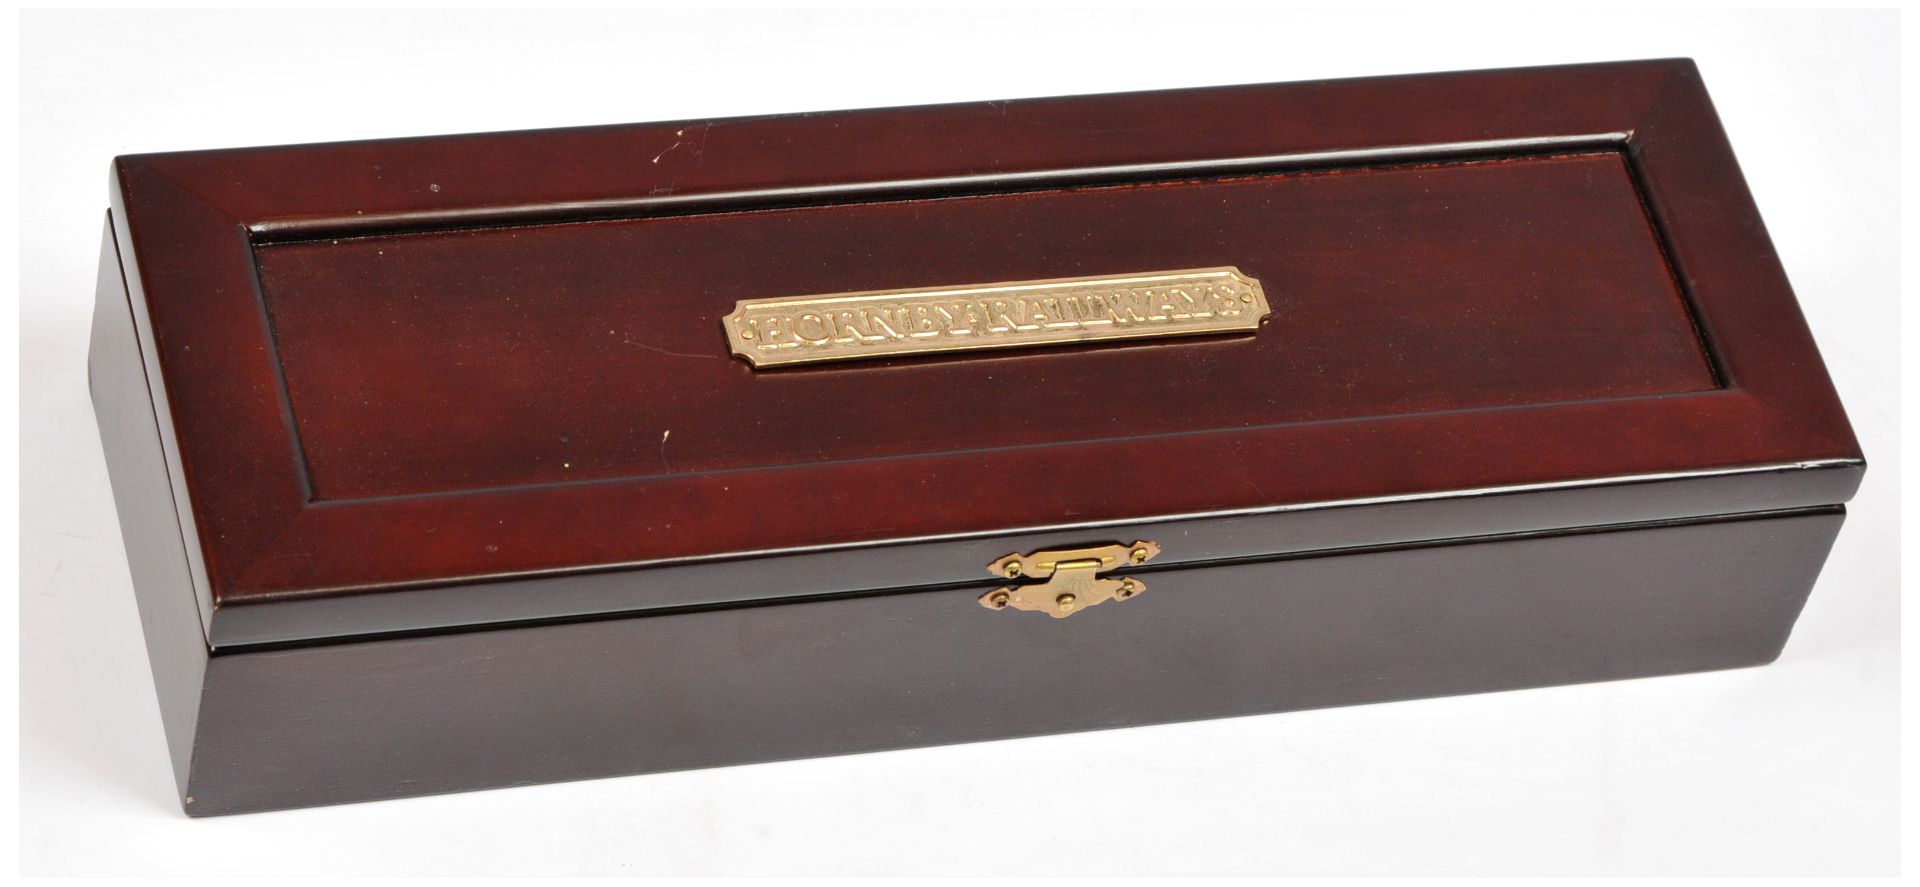 Hornby (GB) R320 Limited Edition "Exeter" EMPTY Wooden Presentation Box - Image 2 of 2